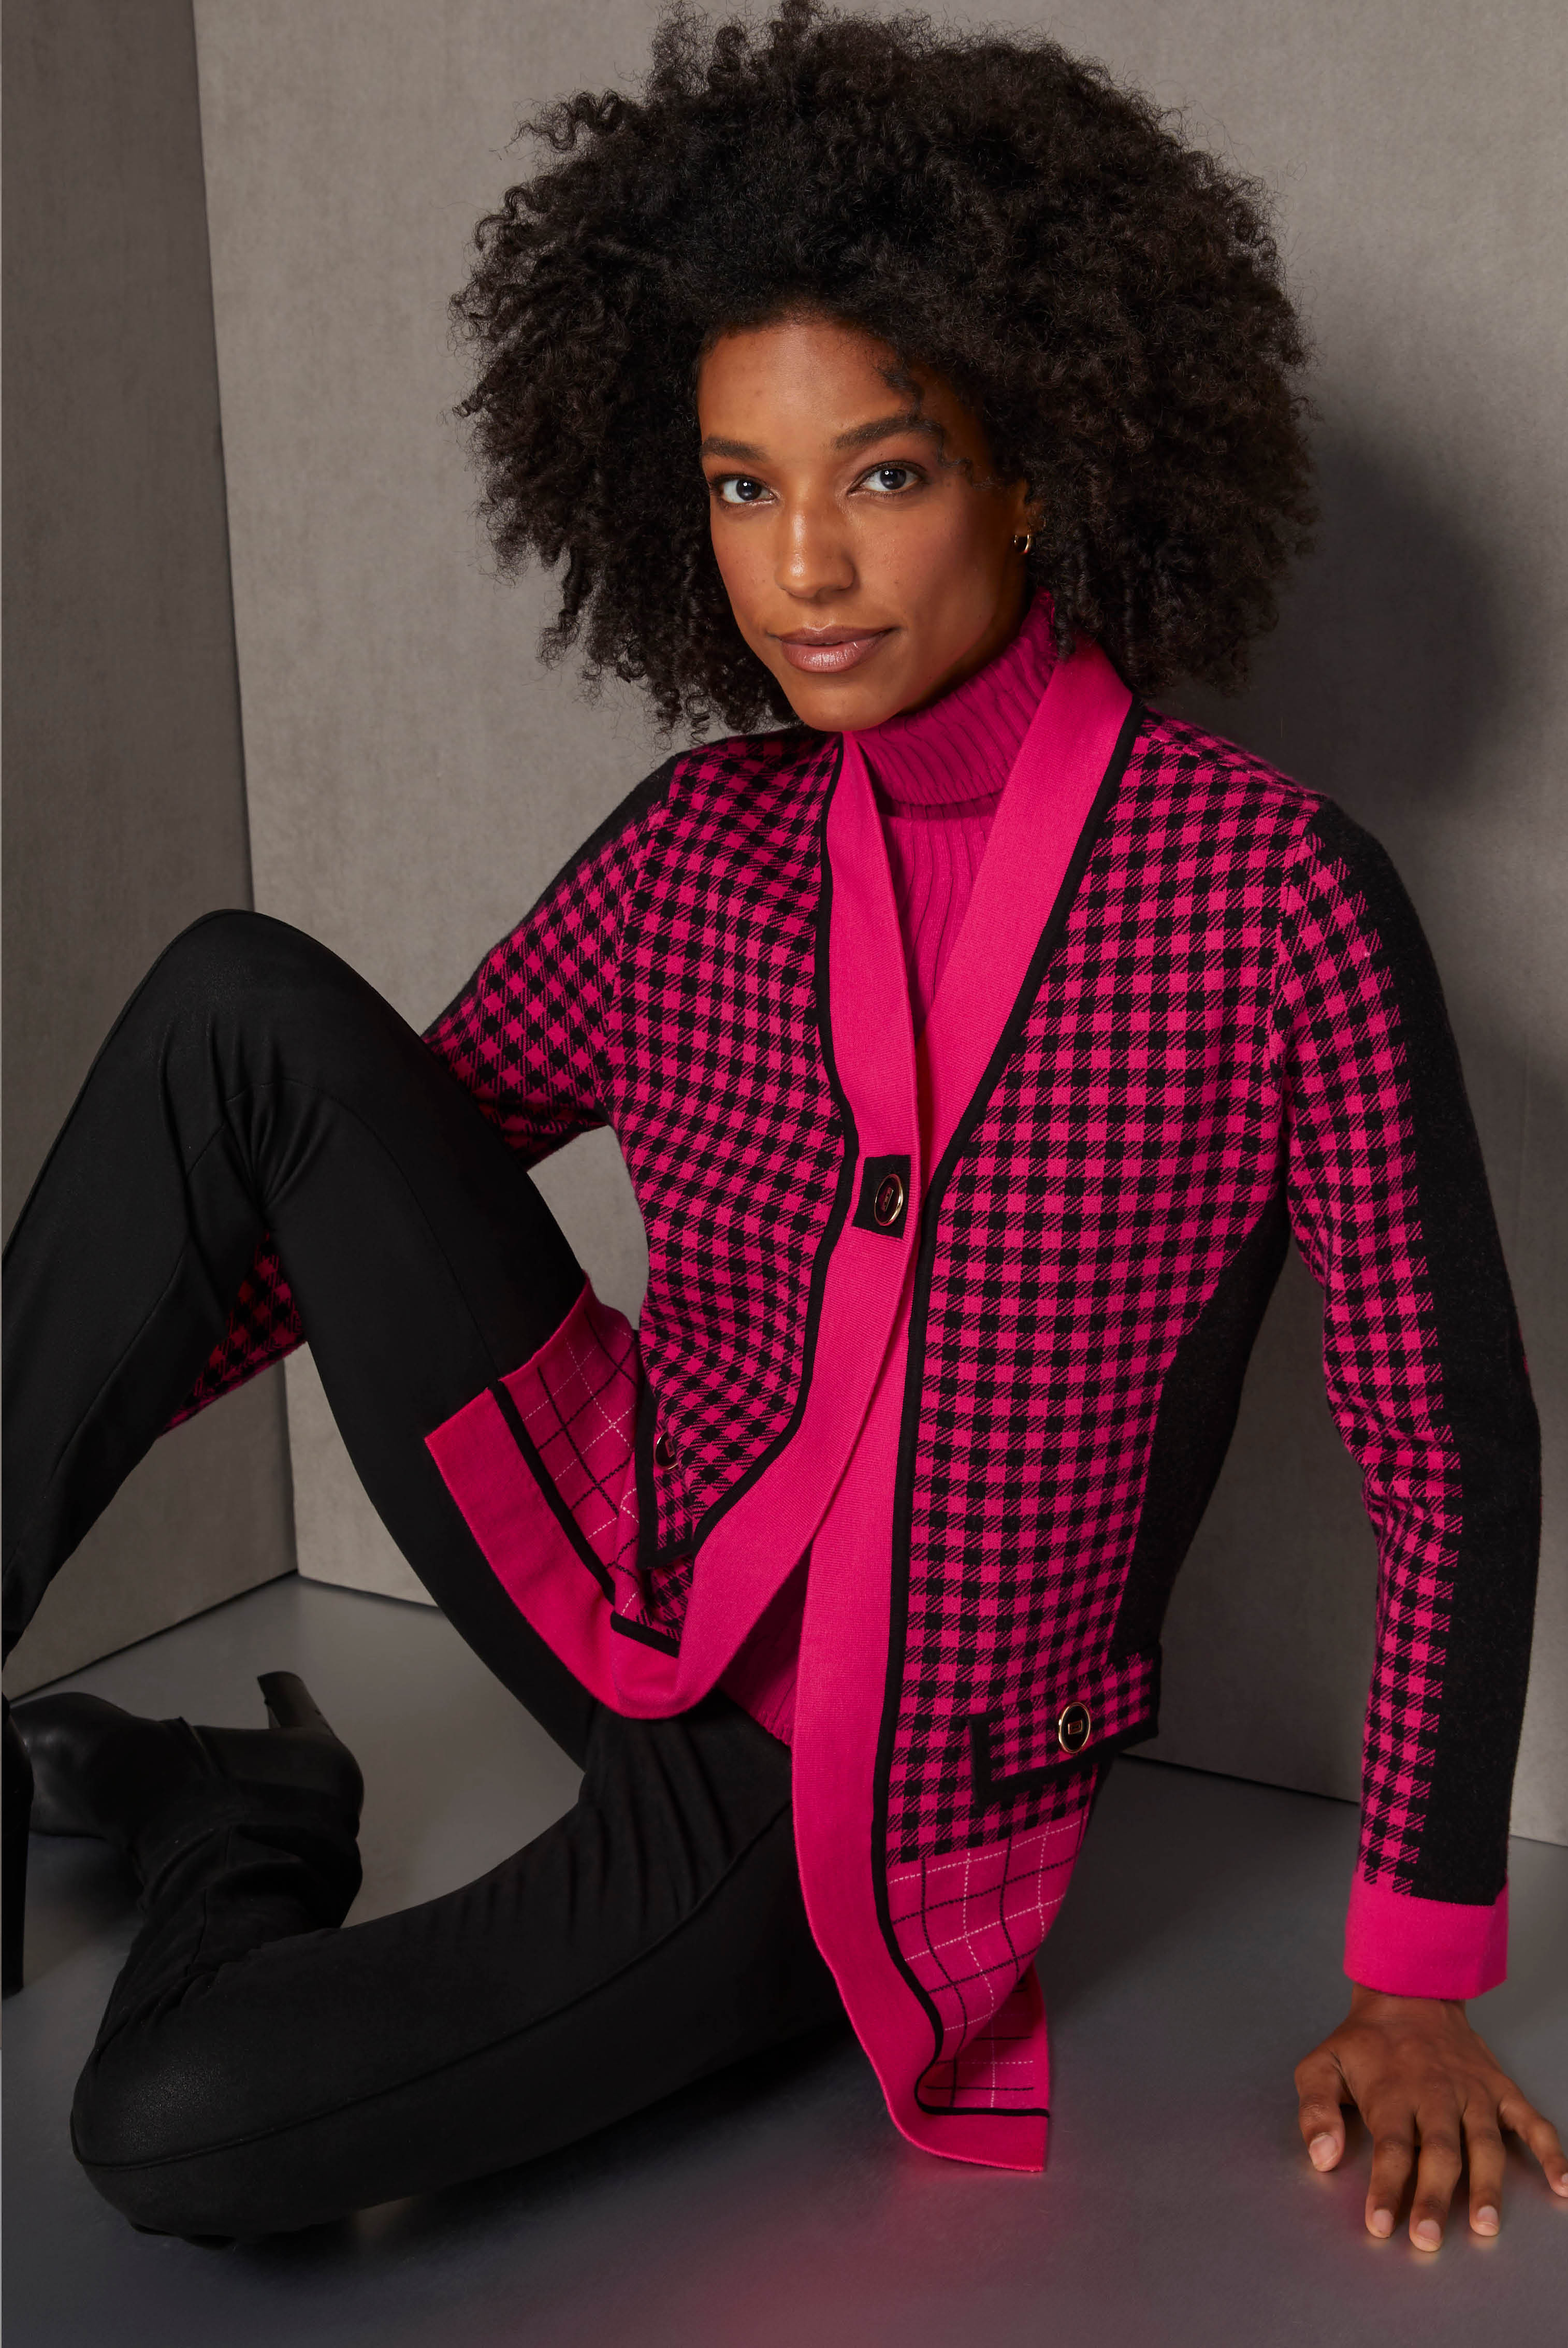 Two standout knits present the glamour of very berry winter pink. The complex cardigan has solid colorblock, tattersall plaid, and check panels, plus a novelty gold-rimmed button.